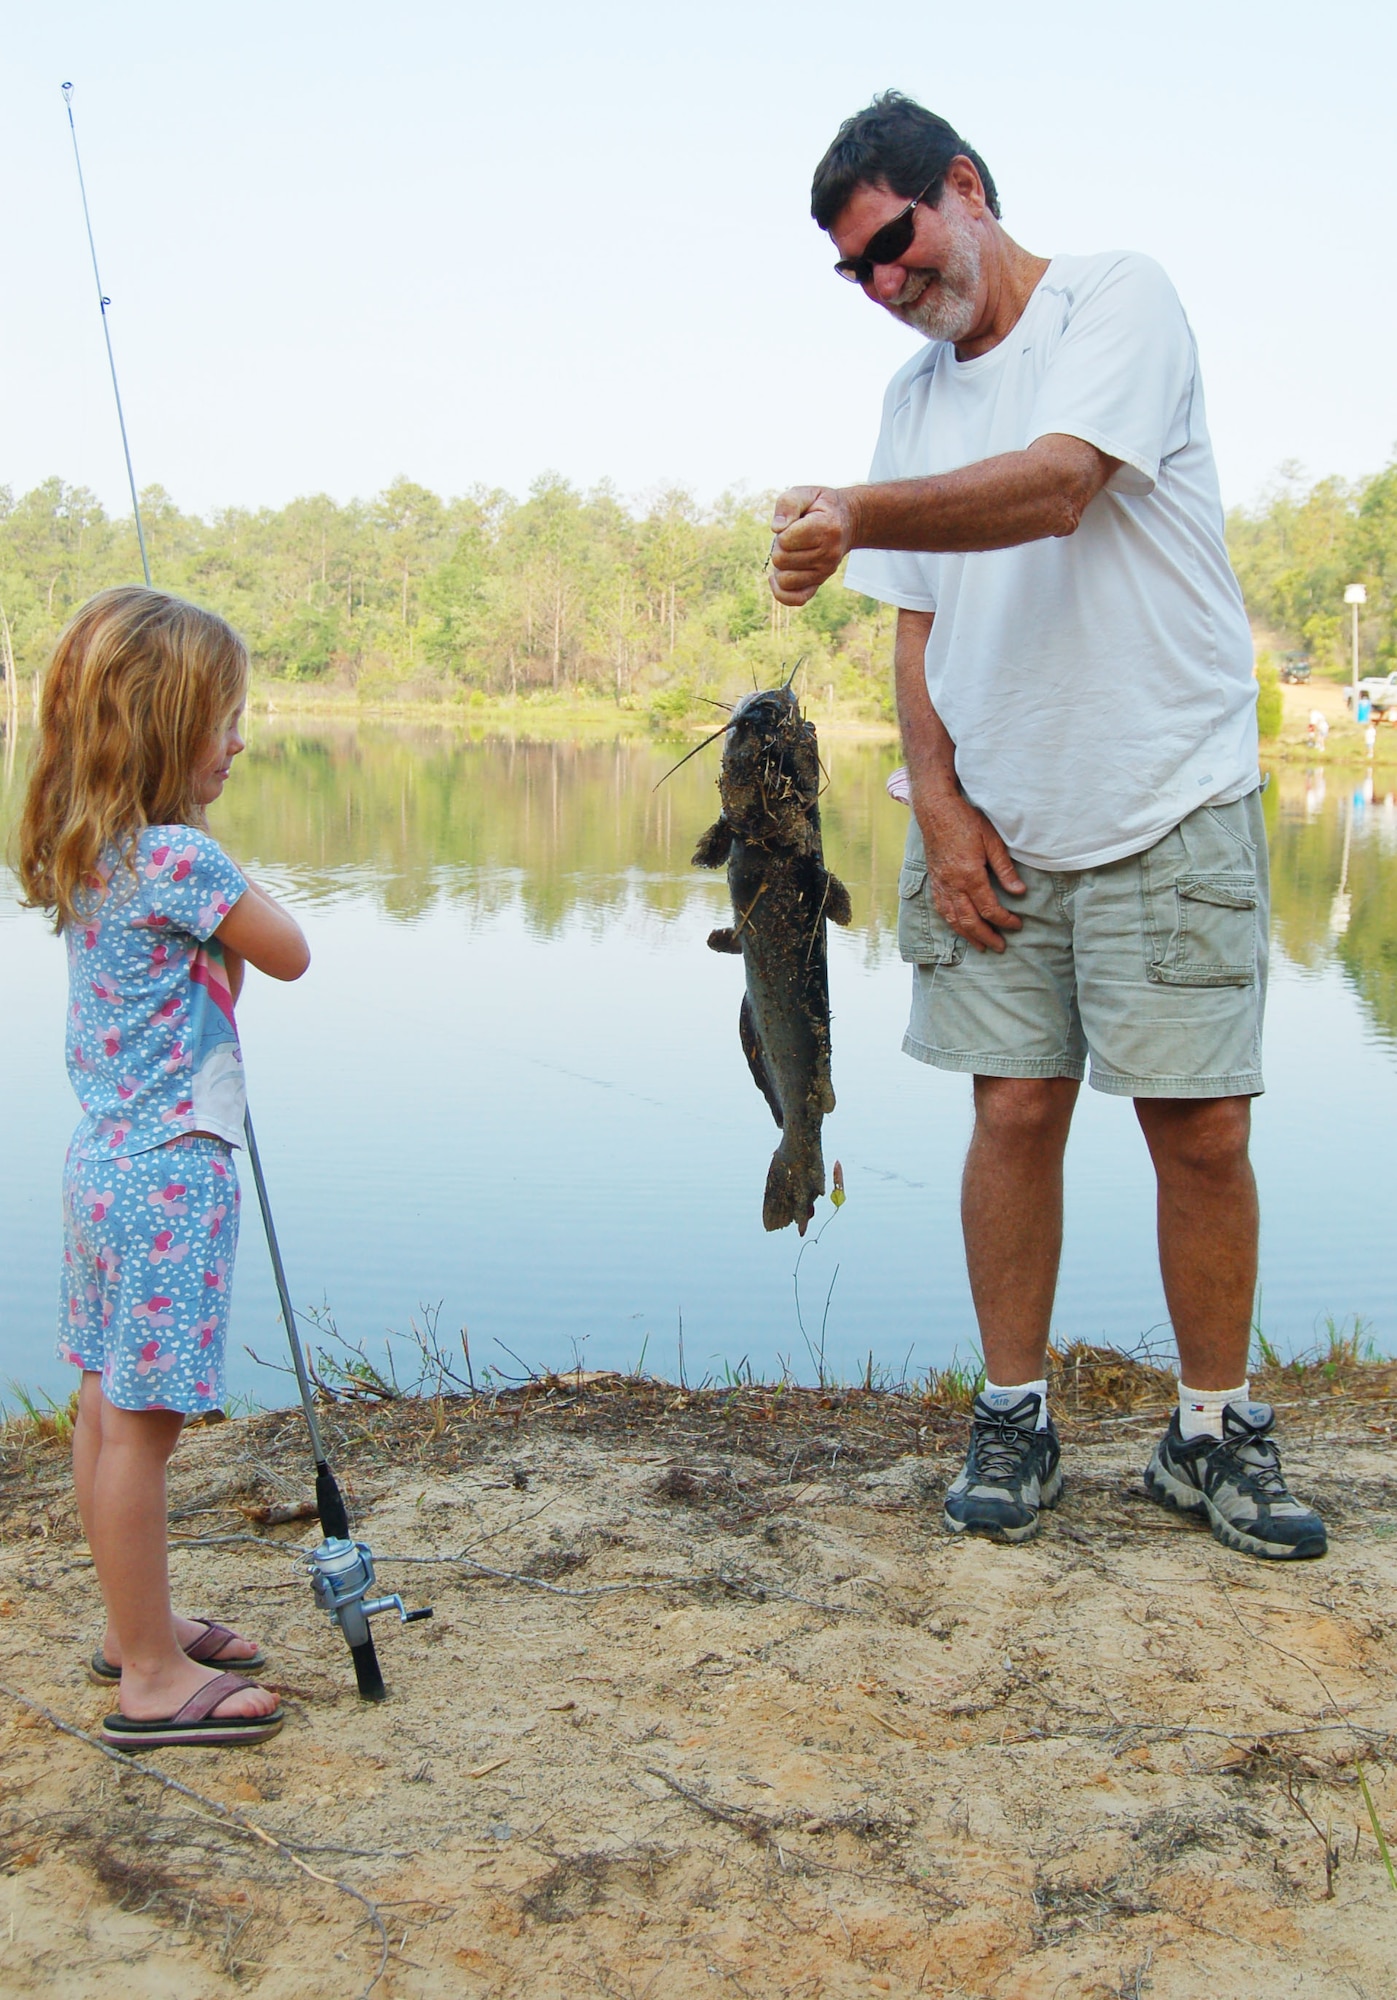 Eglin's Youth Fishing Rodeo excites local youth > Eglin Air Force